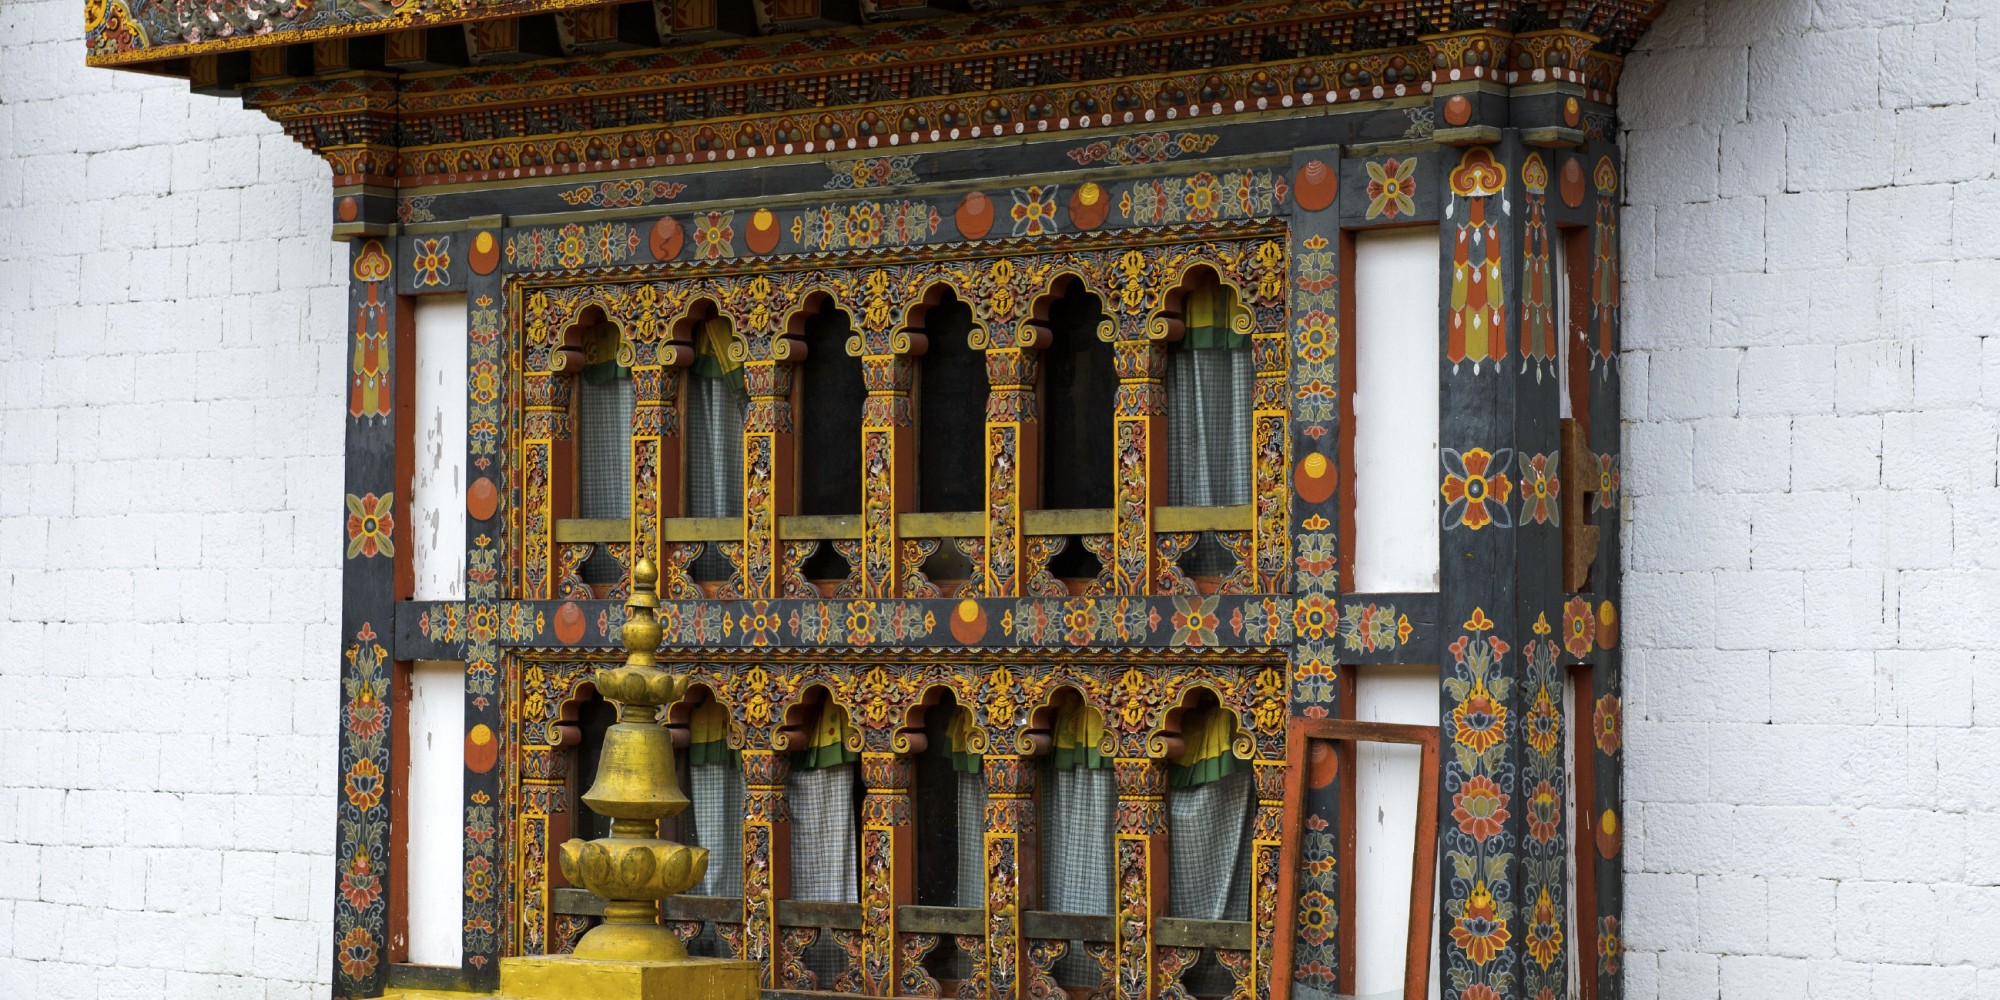 Richly ornated windows and bay windows in the monastery and fortress Punakha Dzong, Punakah, Bhutan